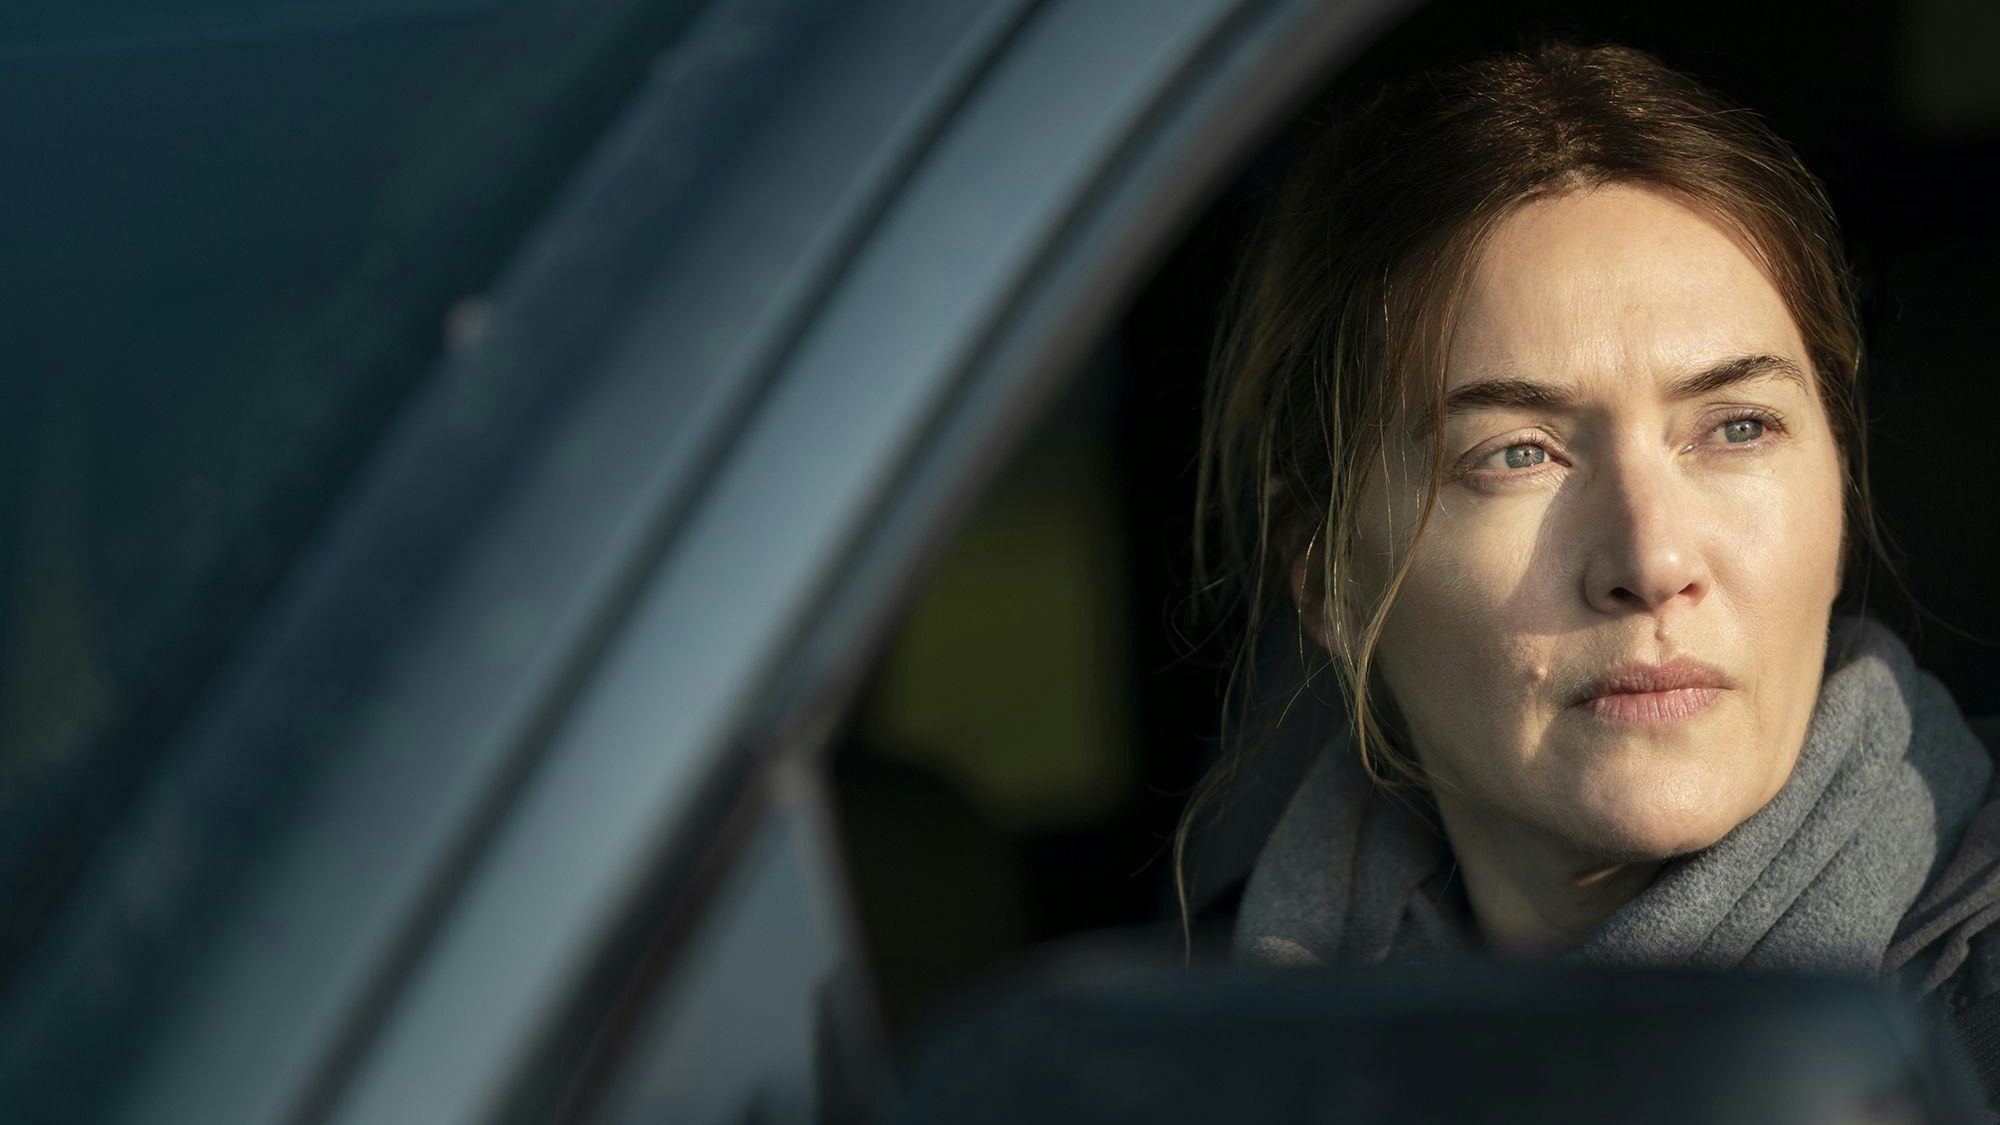 Die HBO-Miniserie „Mare of Easttown“ mit Kate Winslet sorgt für jede Menge Spannung.